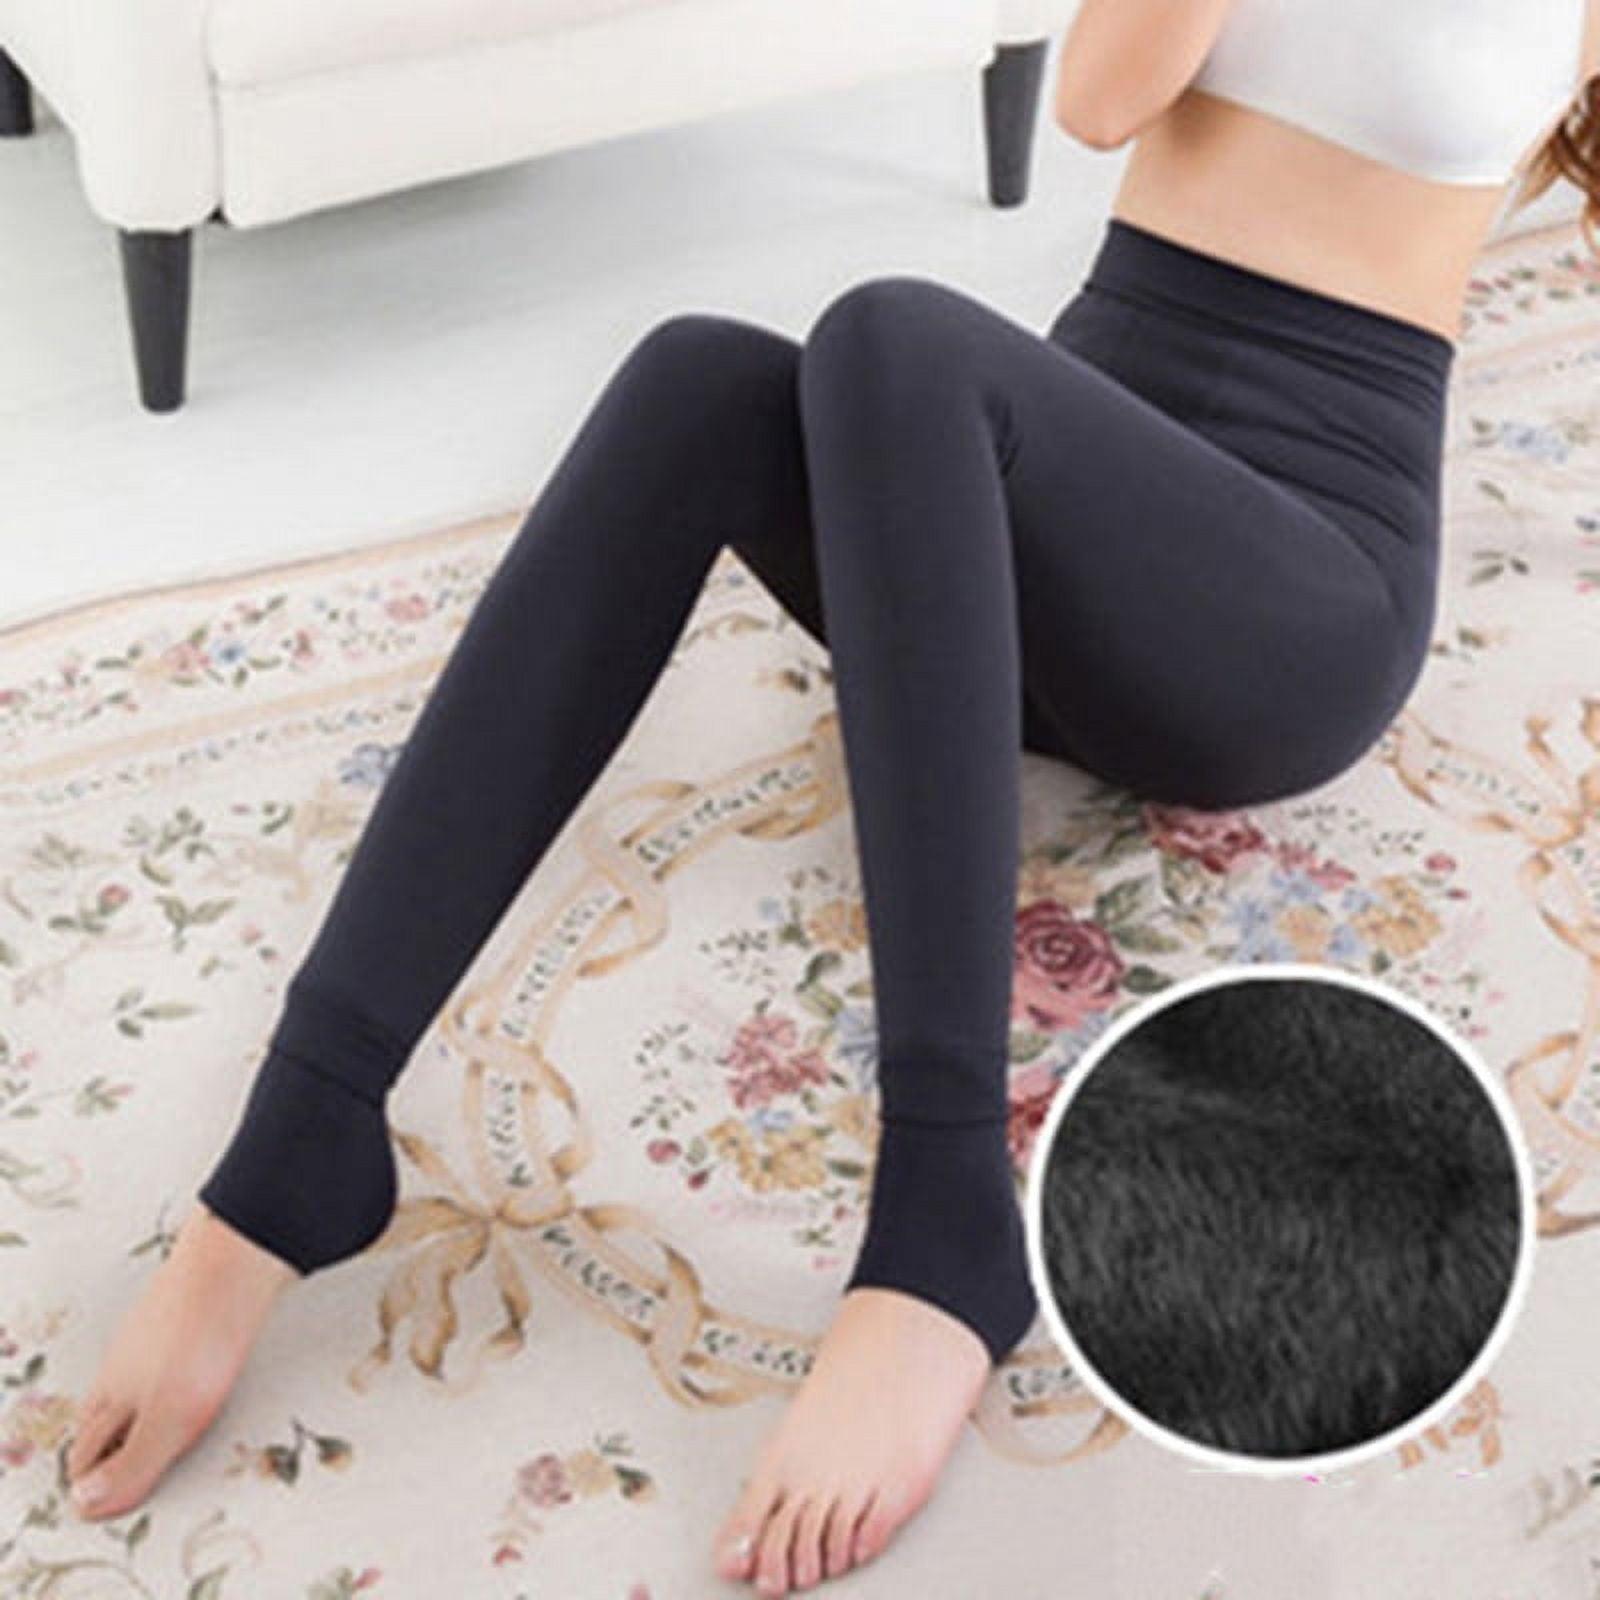 Buy INNER ENRICH Trending Thick Fleece Leggings for Women/Girl (Black/Skin)  | Winter Wear Super Warm Fake Translucent Woolen Fur Stockings | Thigh High  Cute Lined Sheer Thermal Jegging Tights at Amazon.in